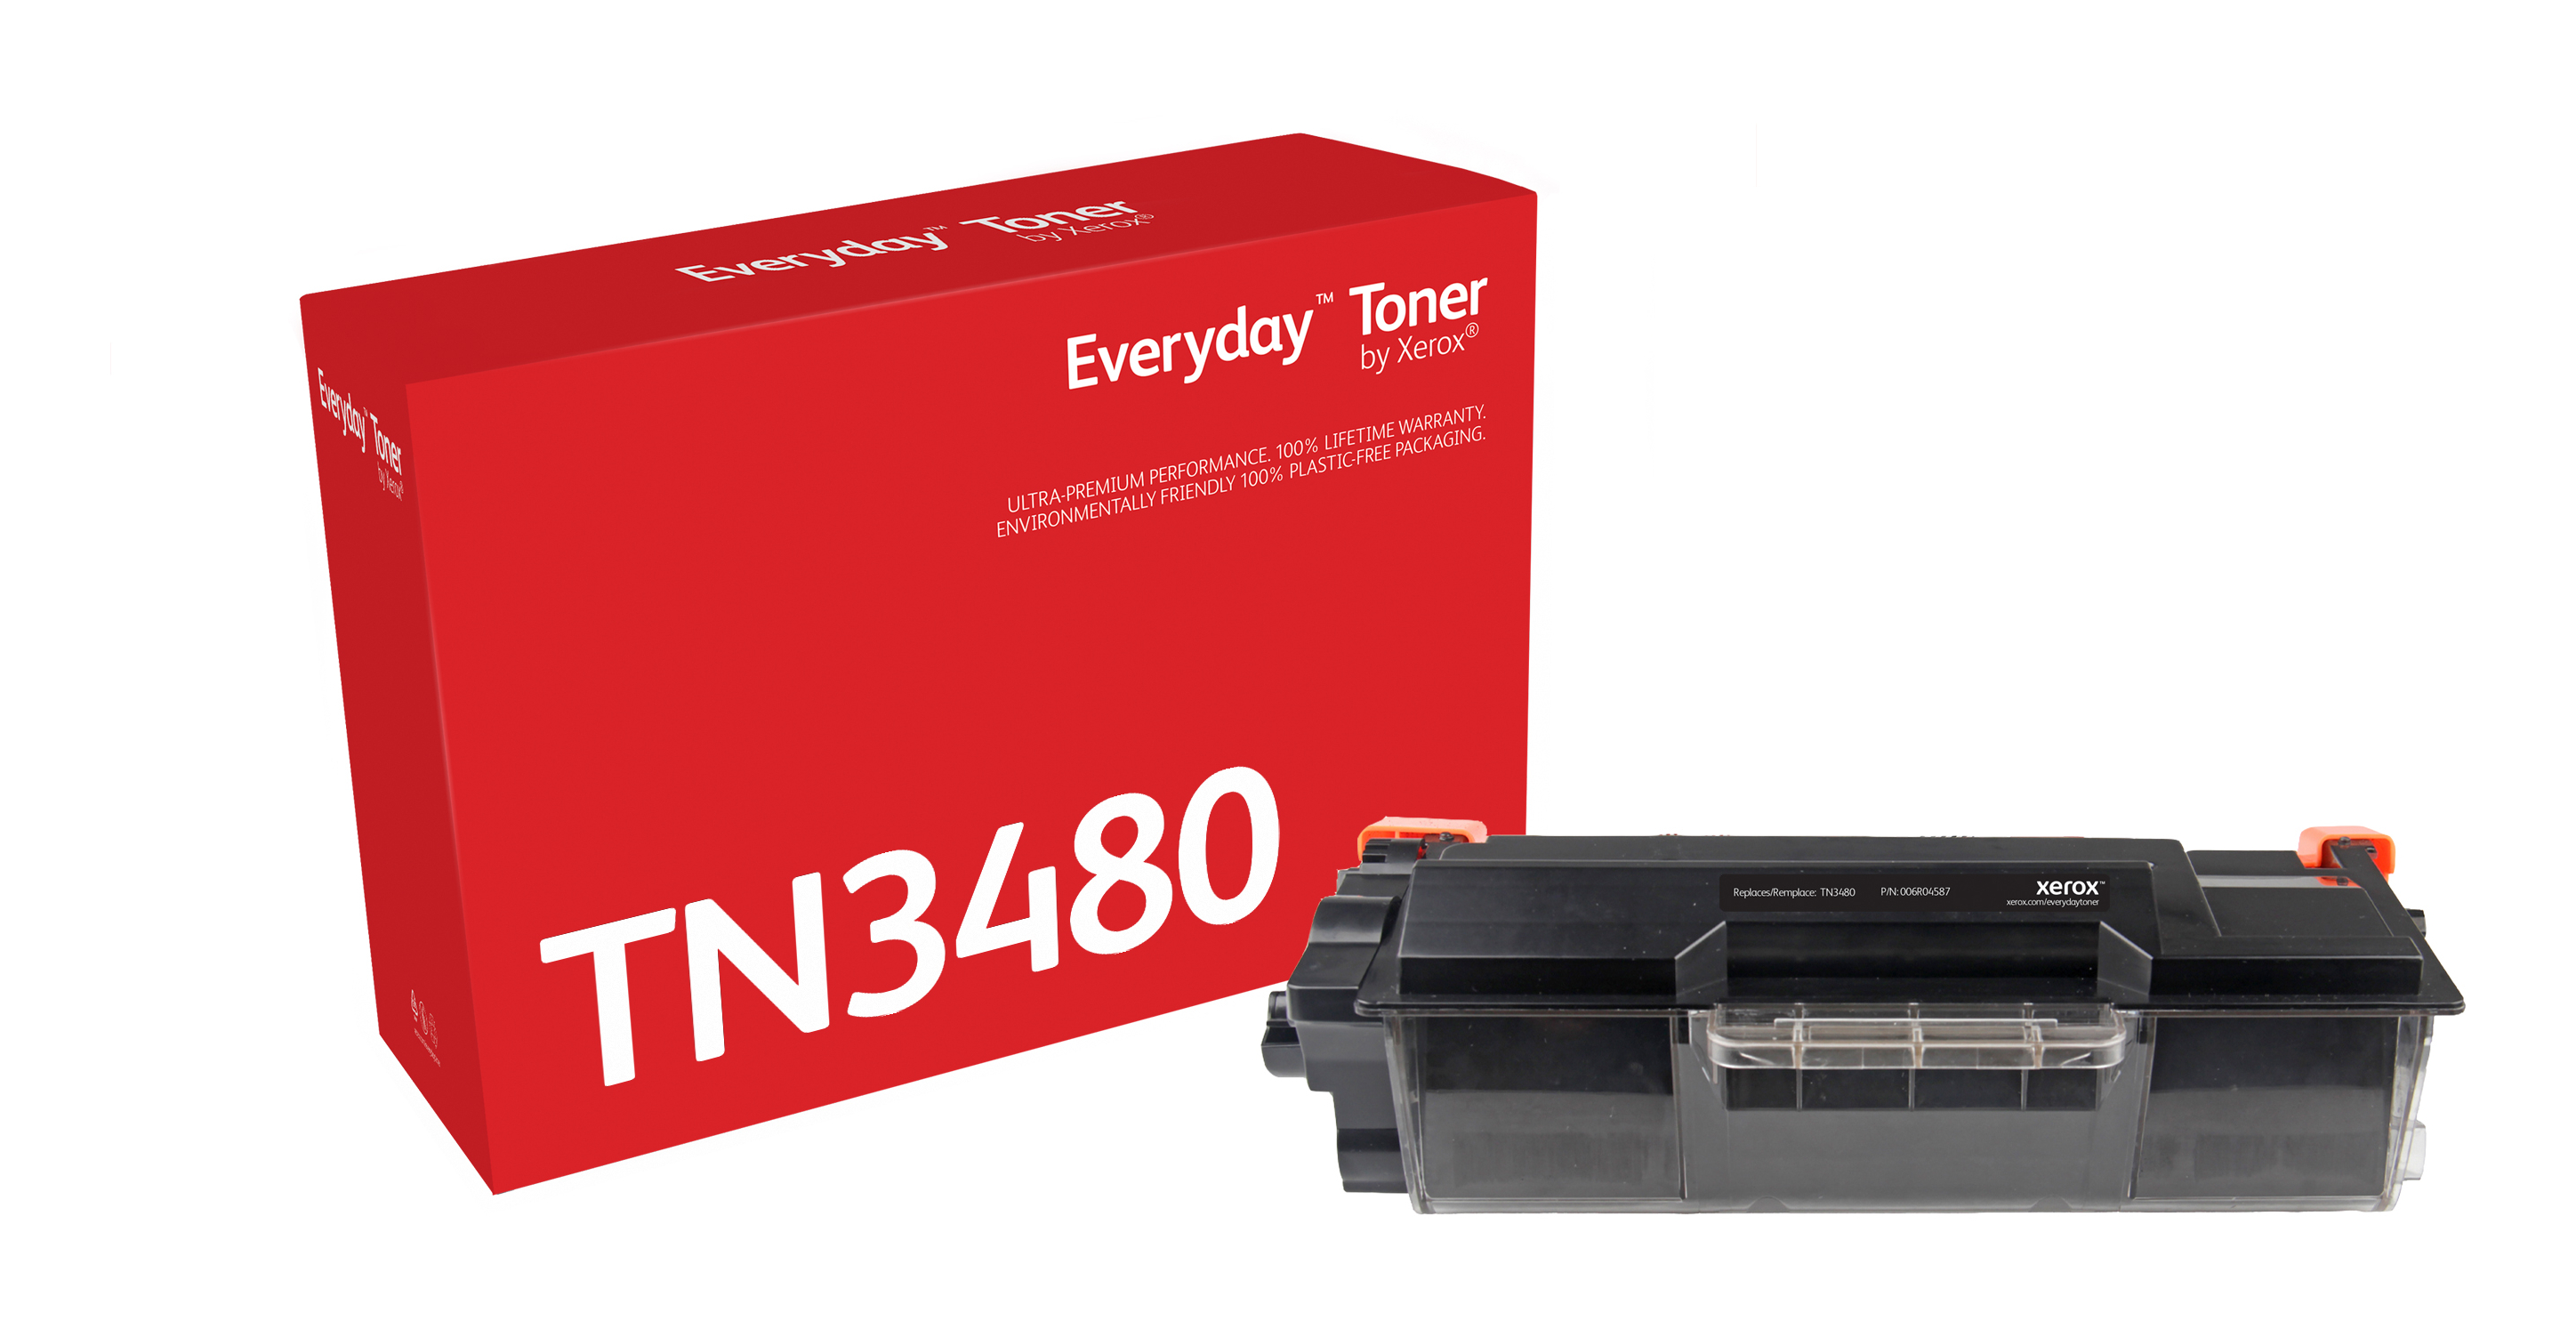 Everyday Mono Toner compatible with Brother TN-3480, Standard Yield  006R04587 by Xerox